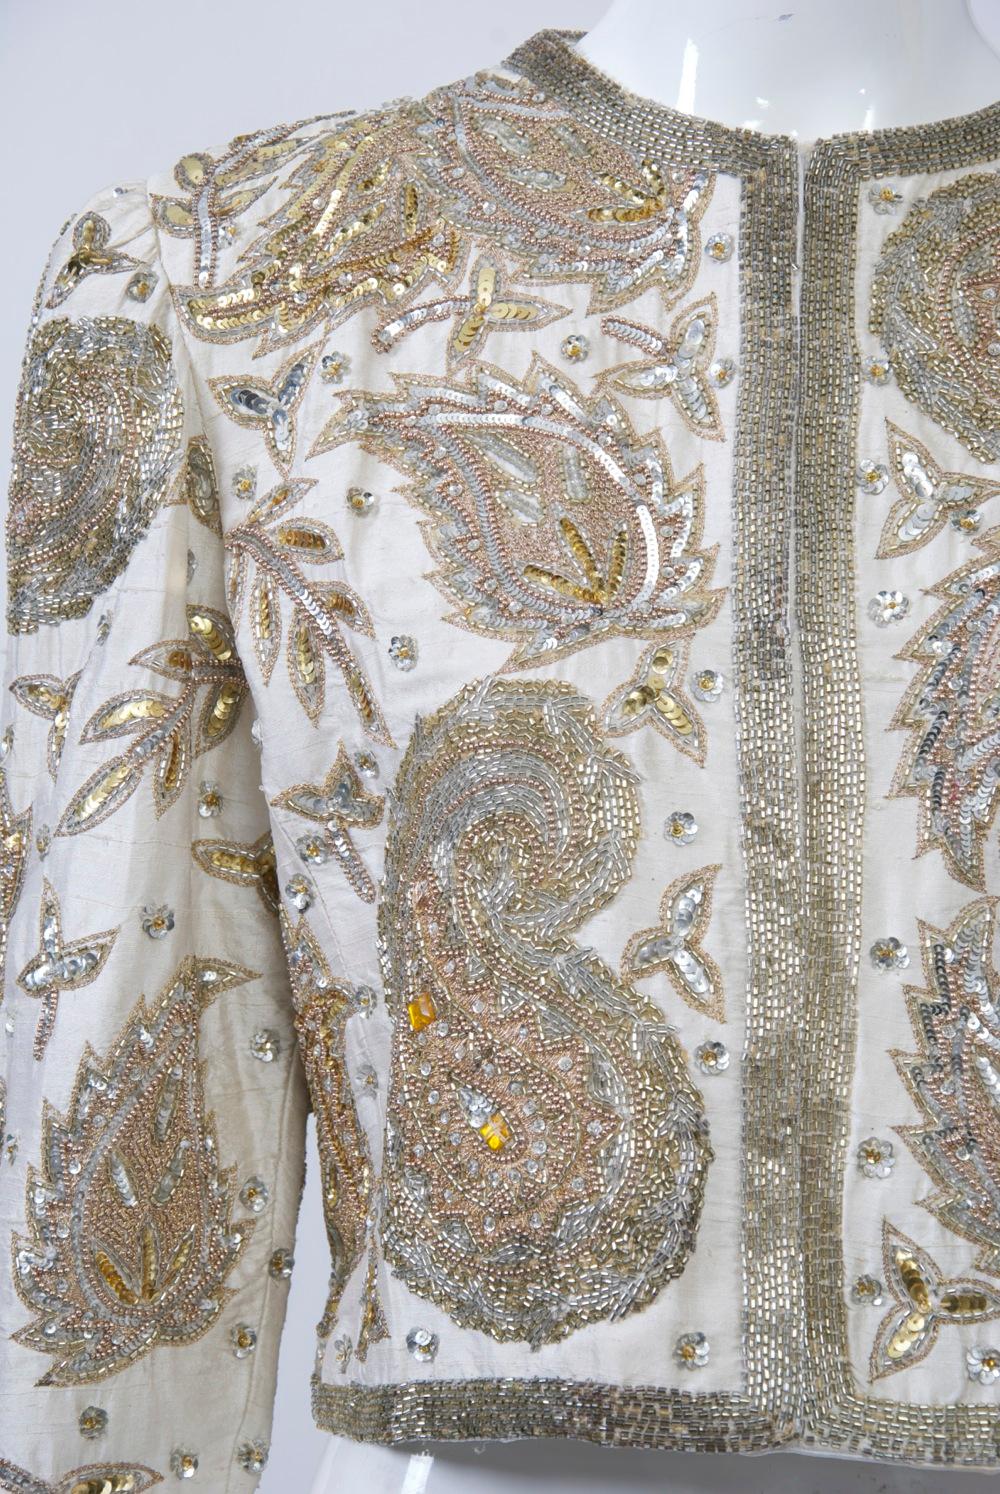 Bergdorf Goodman cropped evening jacket, the body of white silk heavily beaded in a paisley pattern with a variety of silver and gold beads and sequins punctuated with yellow and clear crystals at center. Set-in sleeves, collarless style ending at